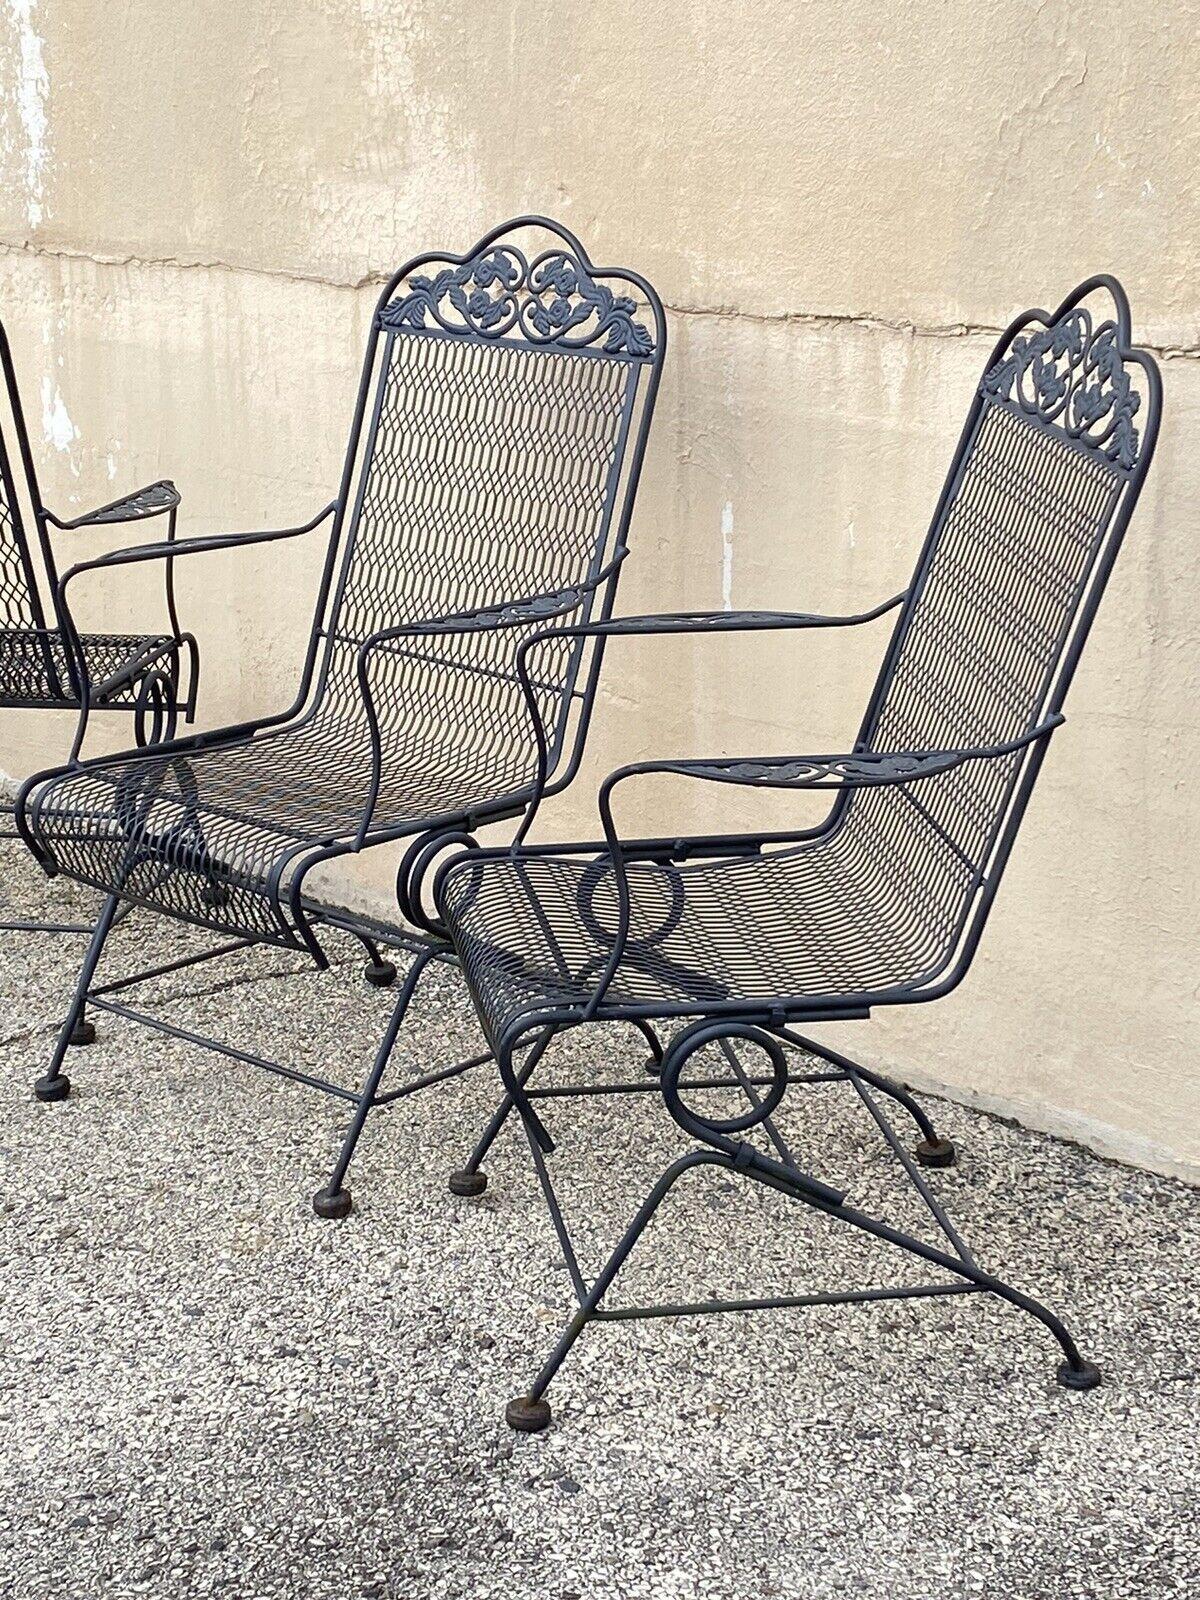 Vintage Wrought Iron Rose and Vine Pattern Garden Patio Chairs - 7 Pc Set For Sale 11